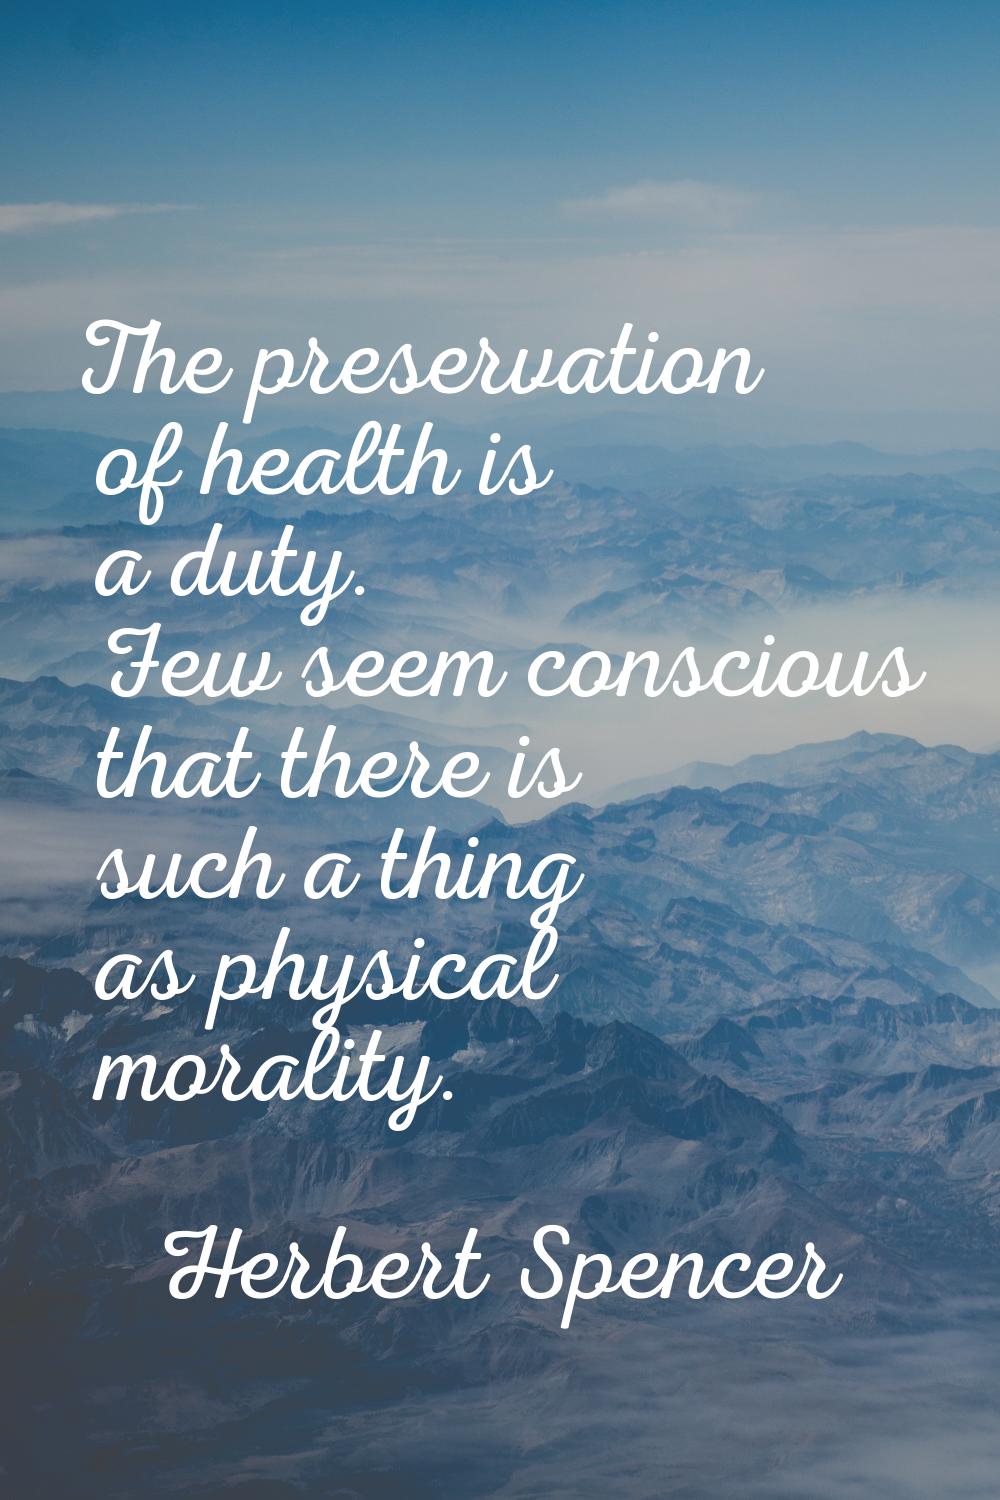 The preservation of health is a duty. Few seem conscious that there is such a thing as physical mor